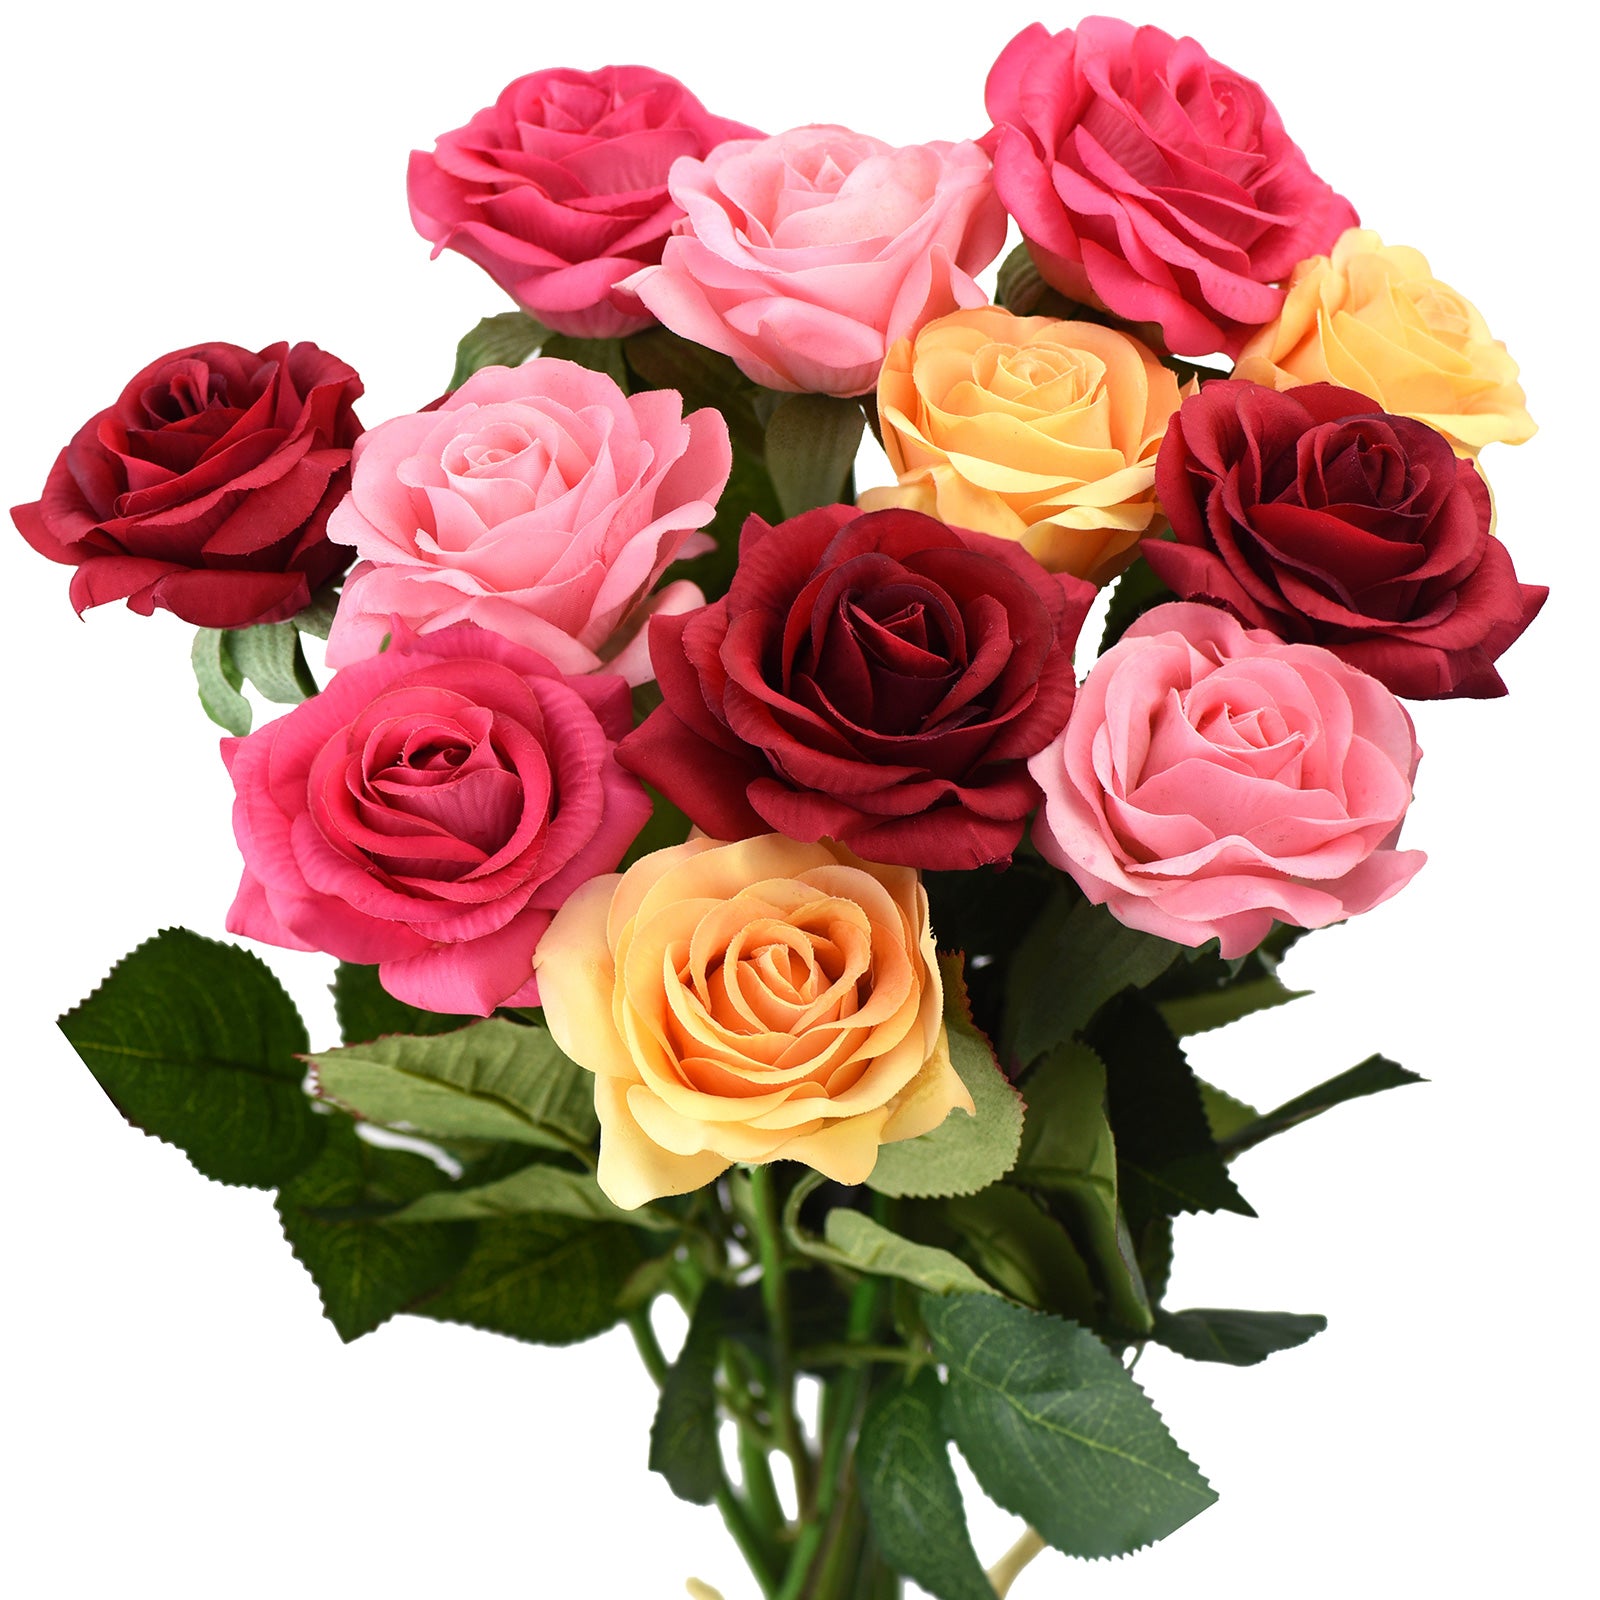 Real Touch 12 Stems "Gracious Medley" Mix Color Silk Artificial Roses Flowers ‘Petals Feel and Look like Fresh Roses